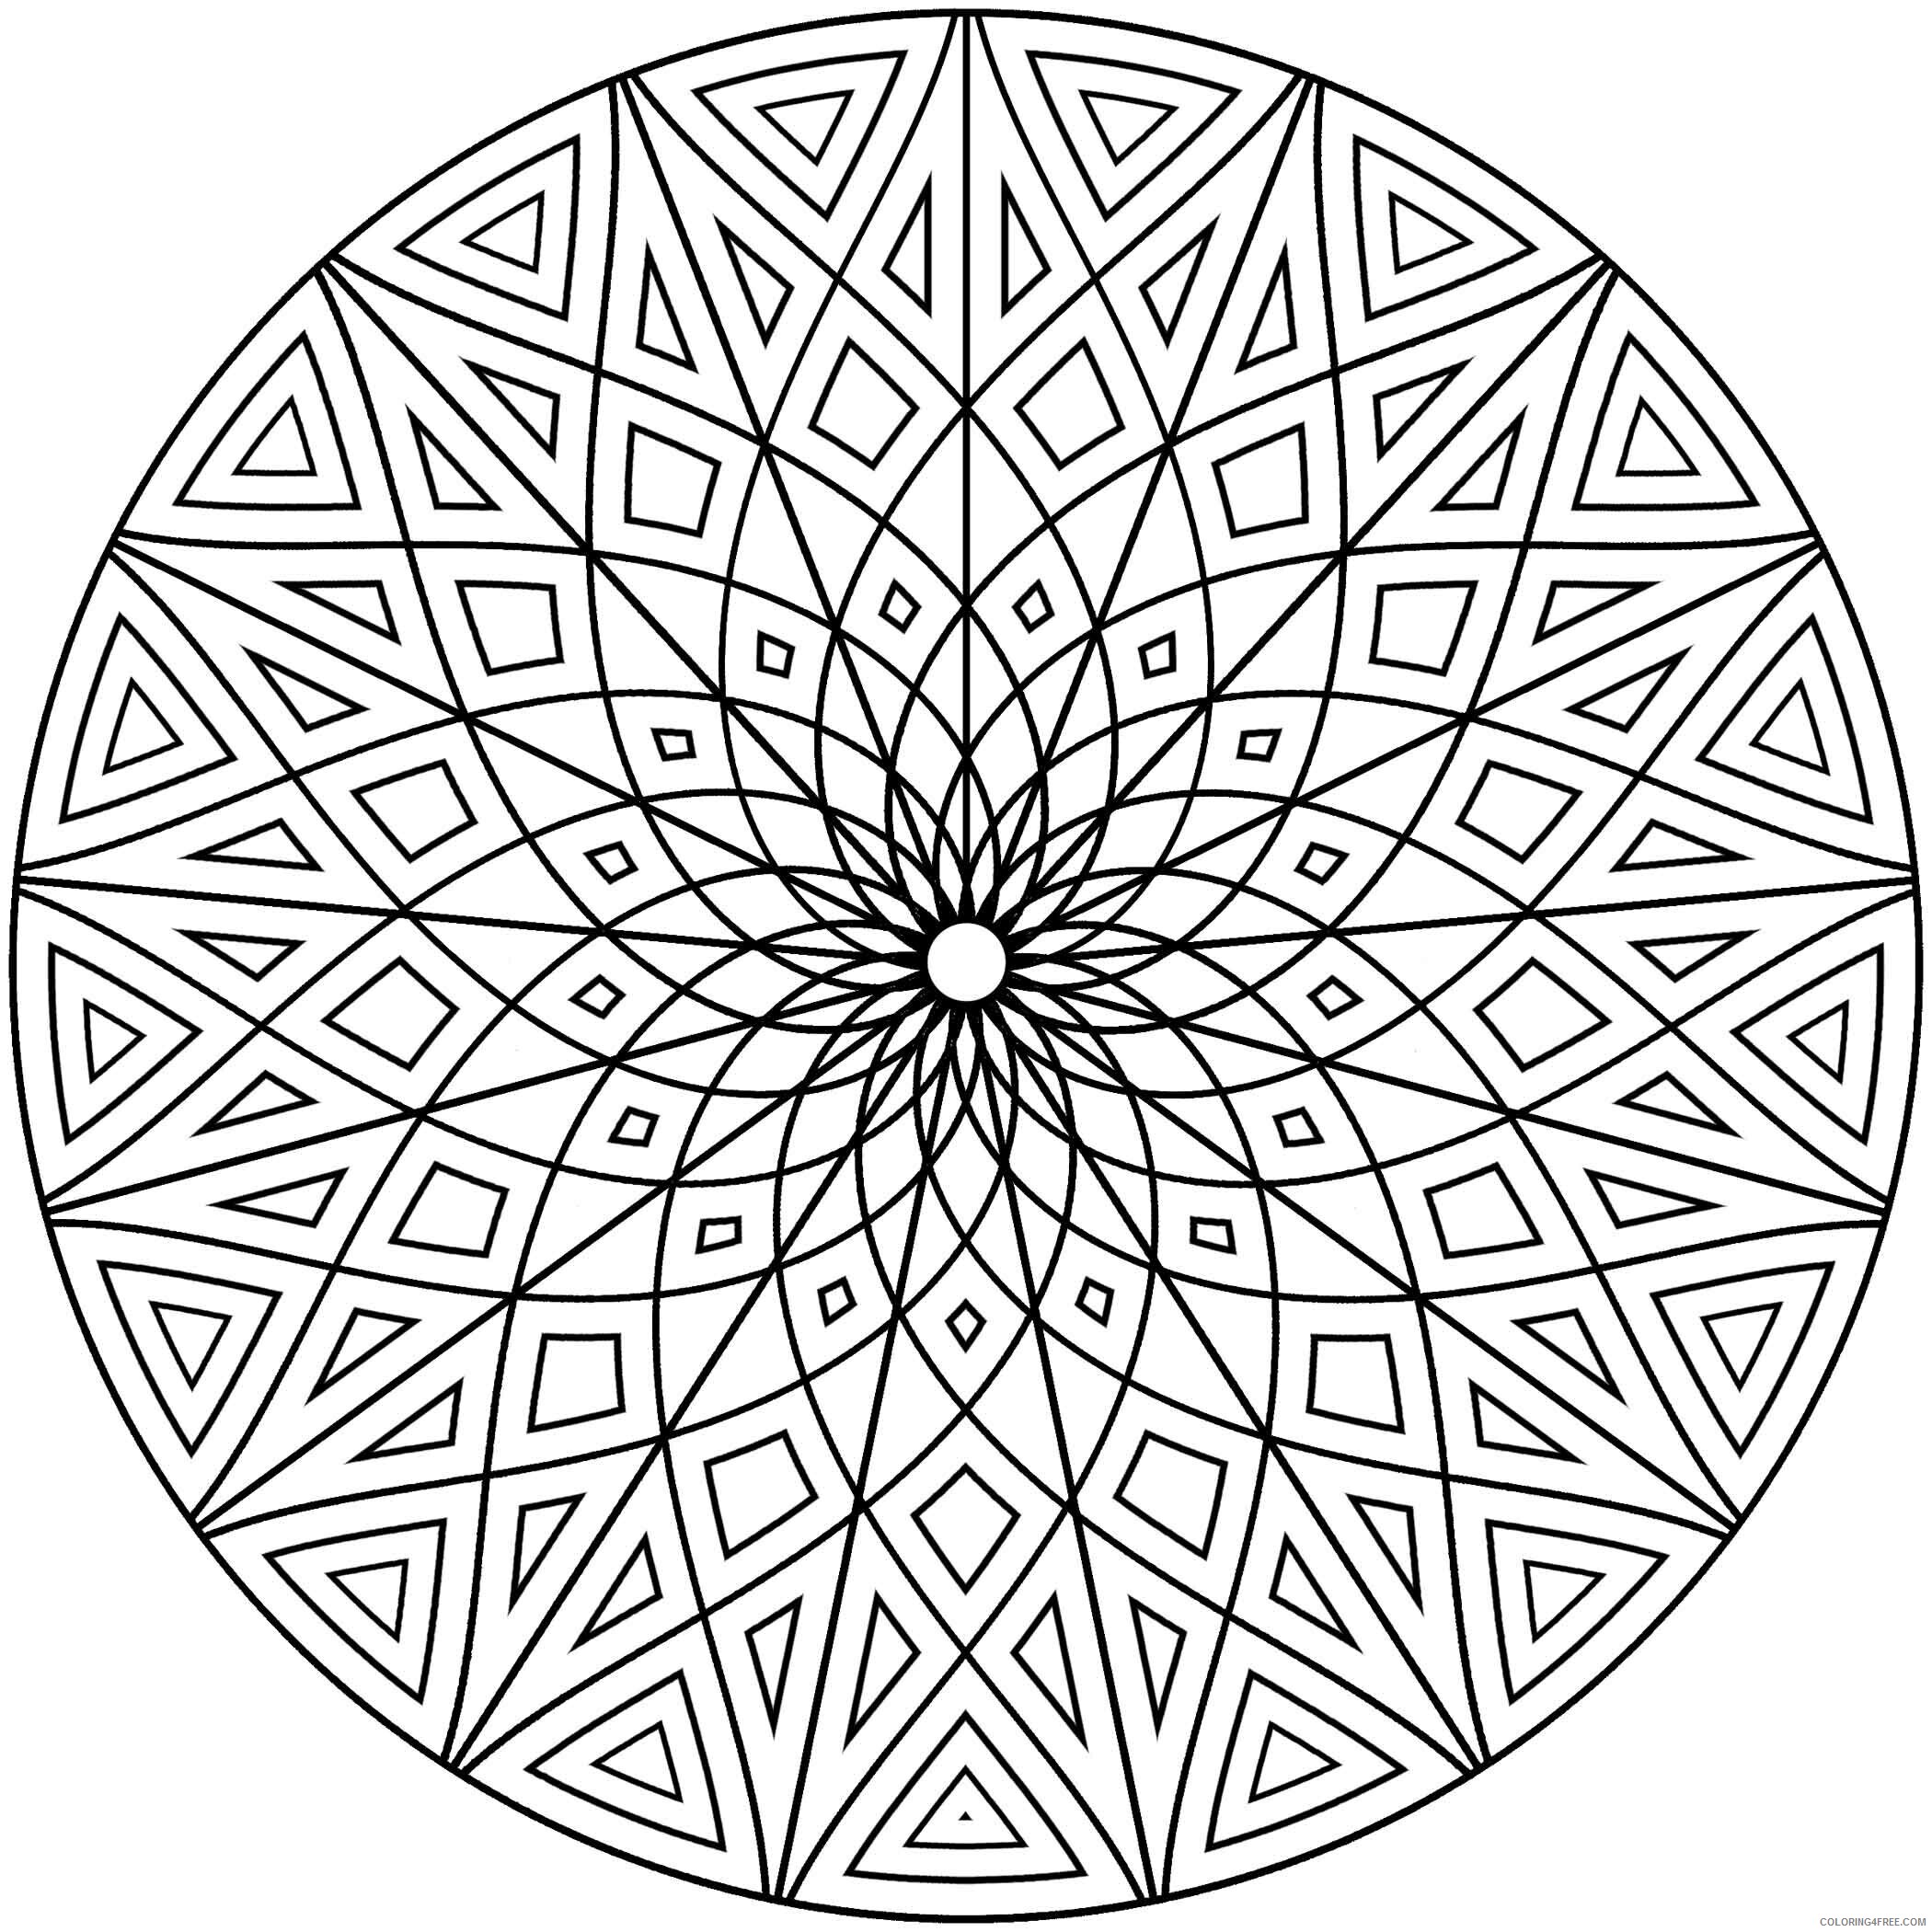 Awesome Design Mandala Coloring Pages Free Printable Sheets Cool Designs In 2021 a Coloring4free